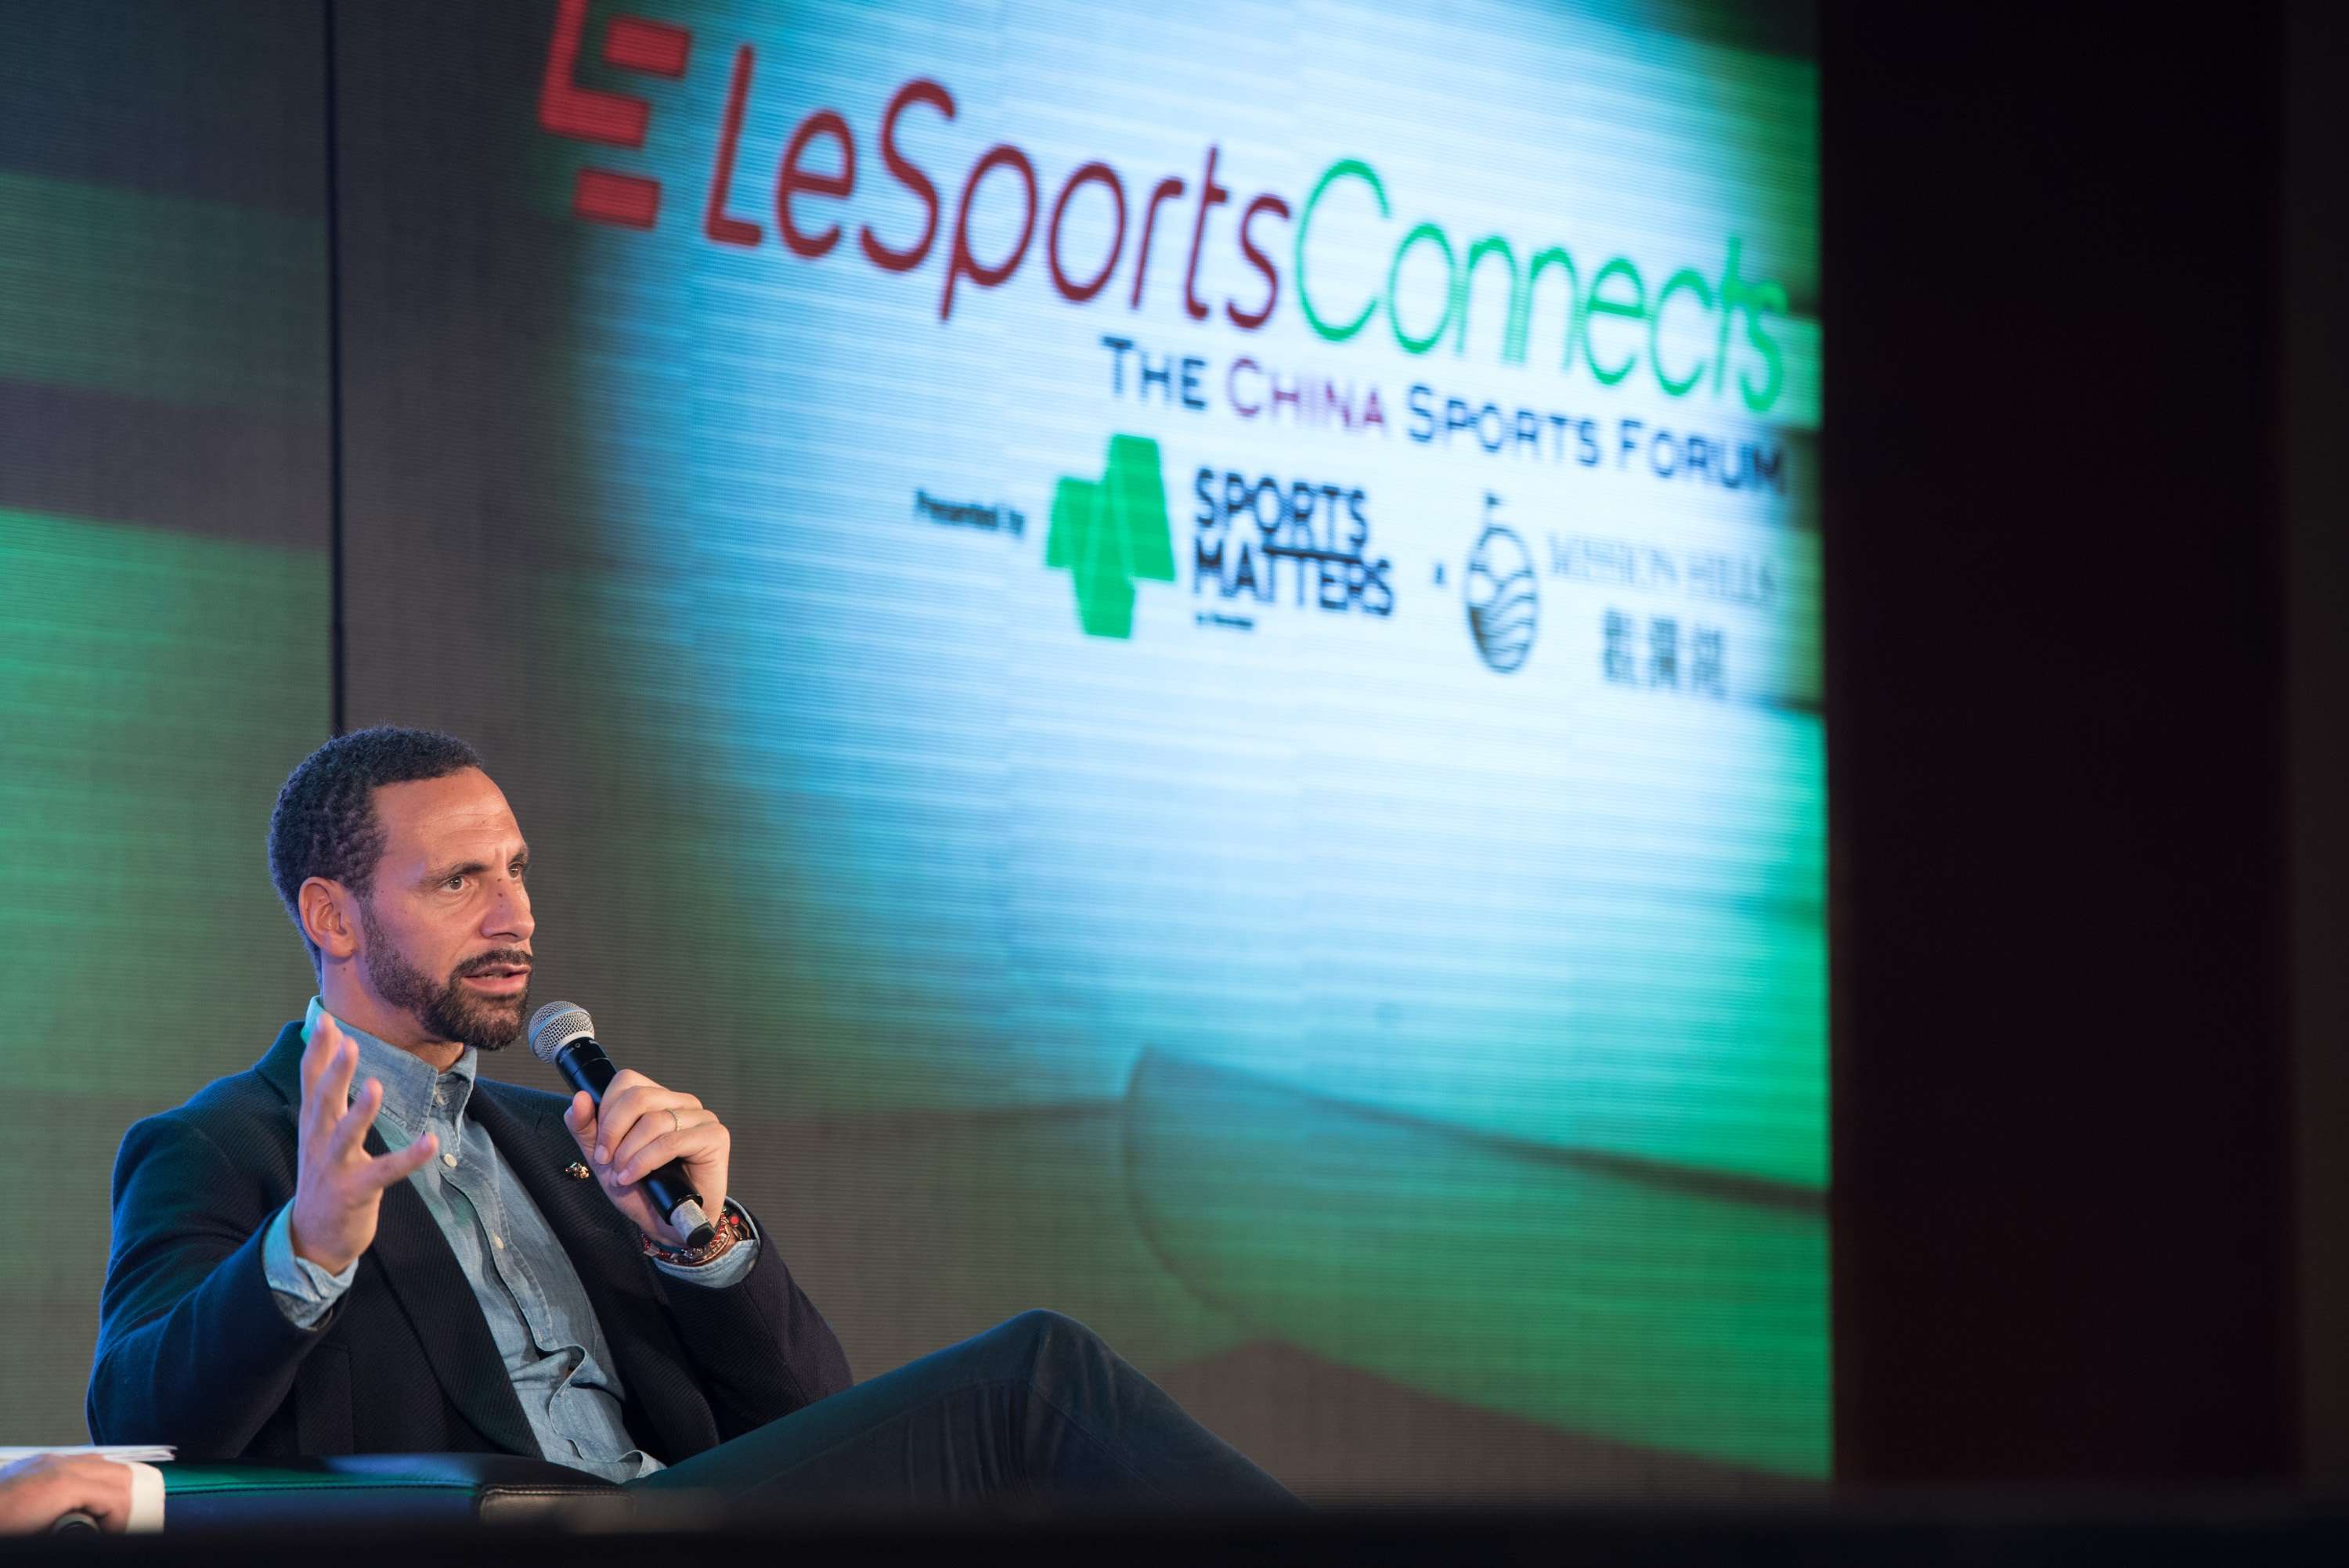 International footballer turned publisher Rio Ferdinand wants to learn about the China market. Photos: LeSports Connects 2016